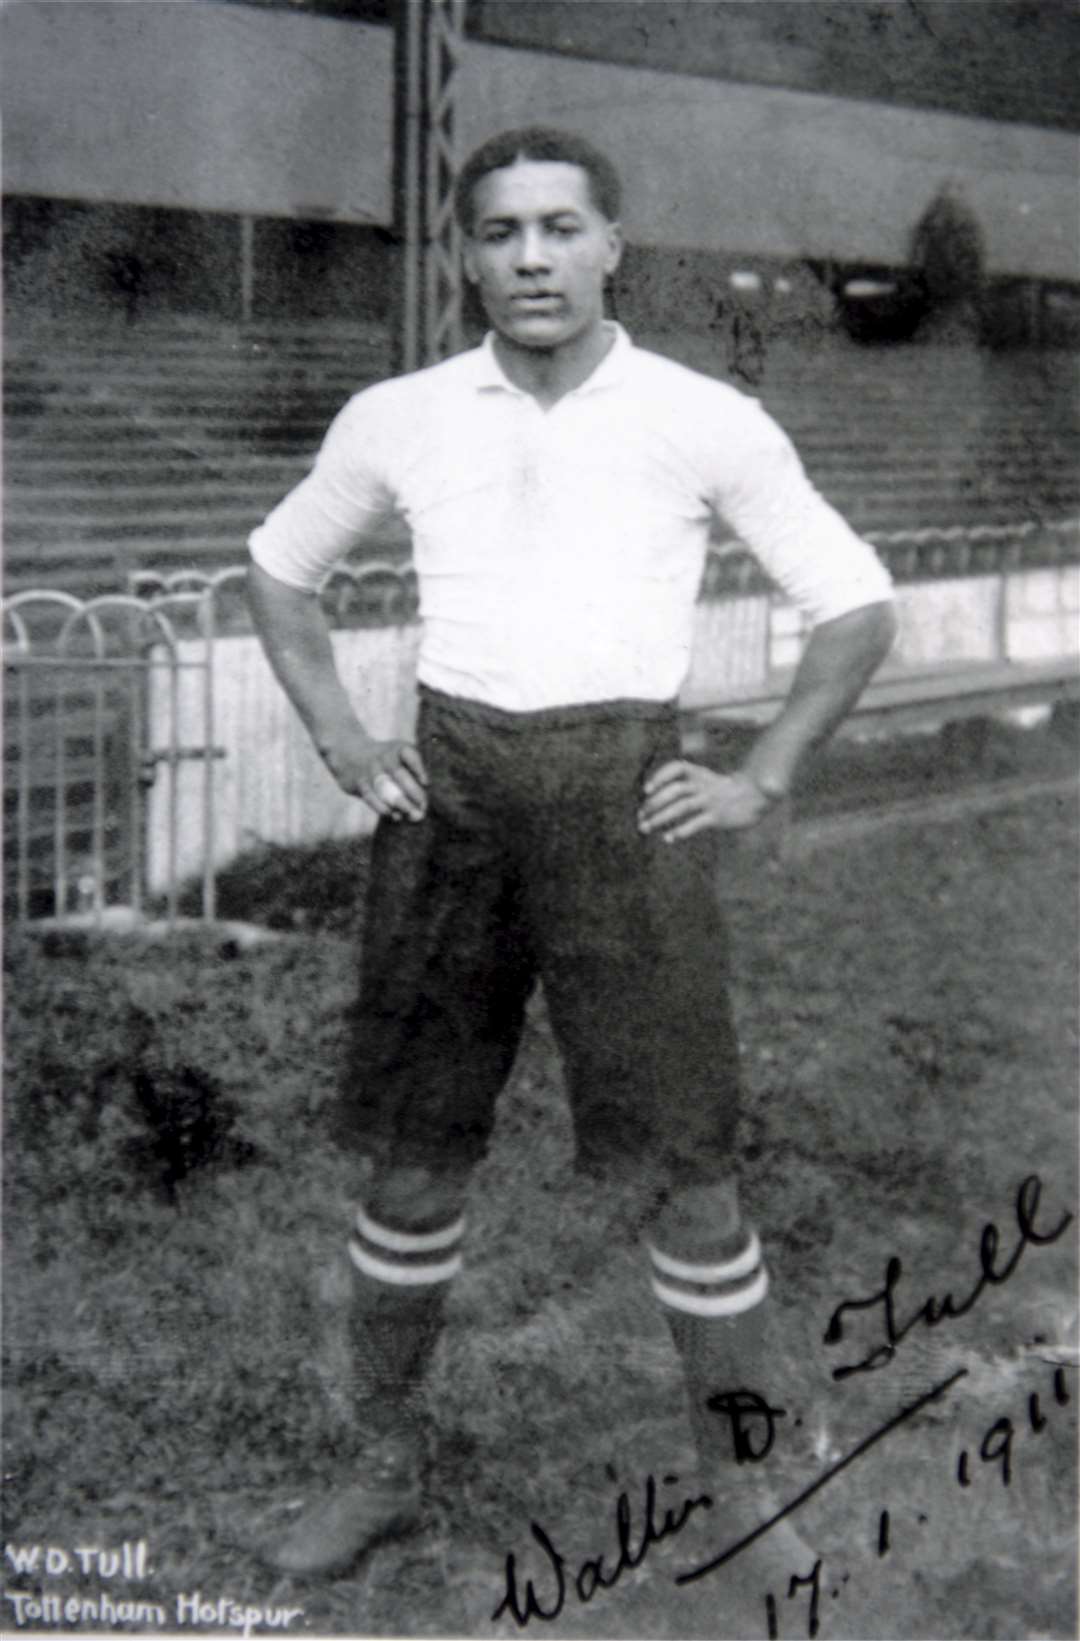 Walter Tull played for Tottenham Hotspur, pictured here in 1911. Picture: Gary Anthony.